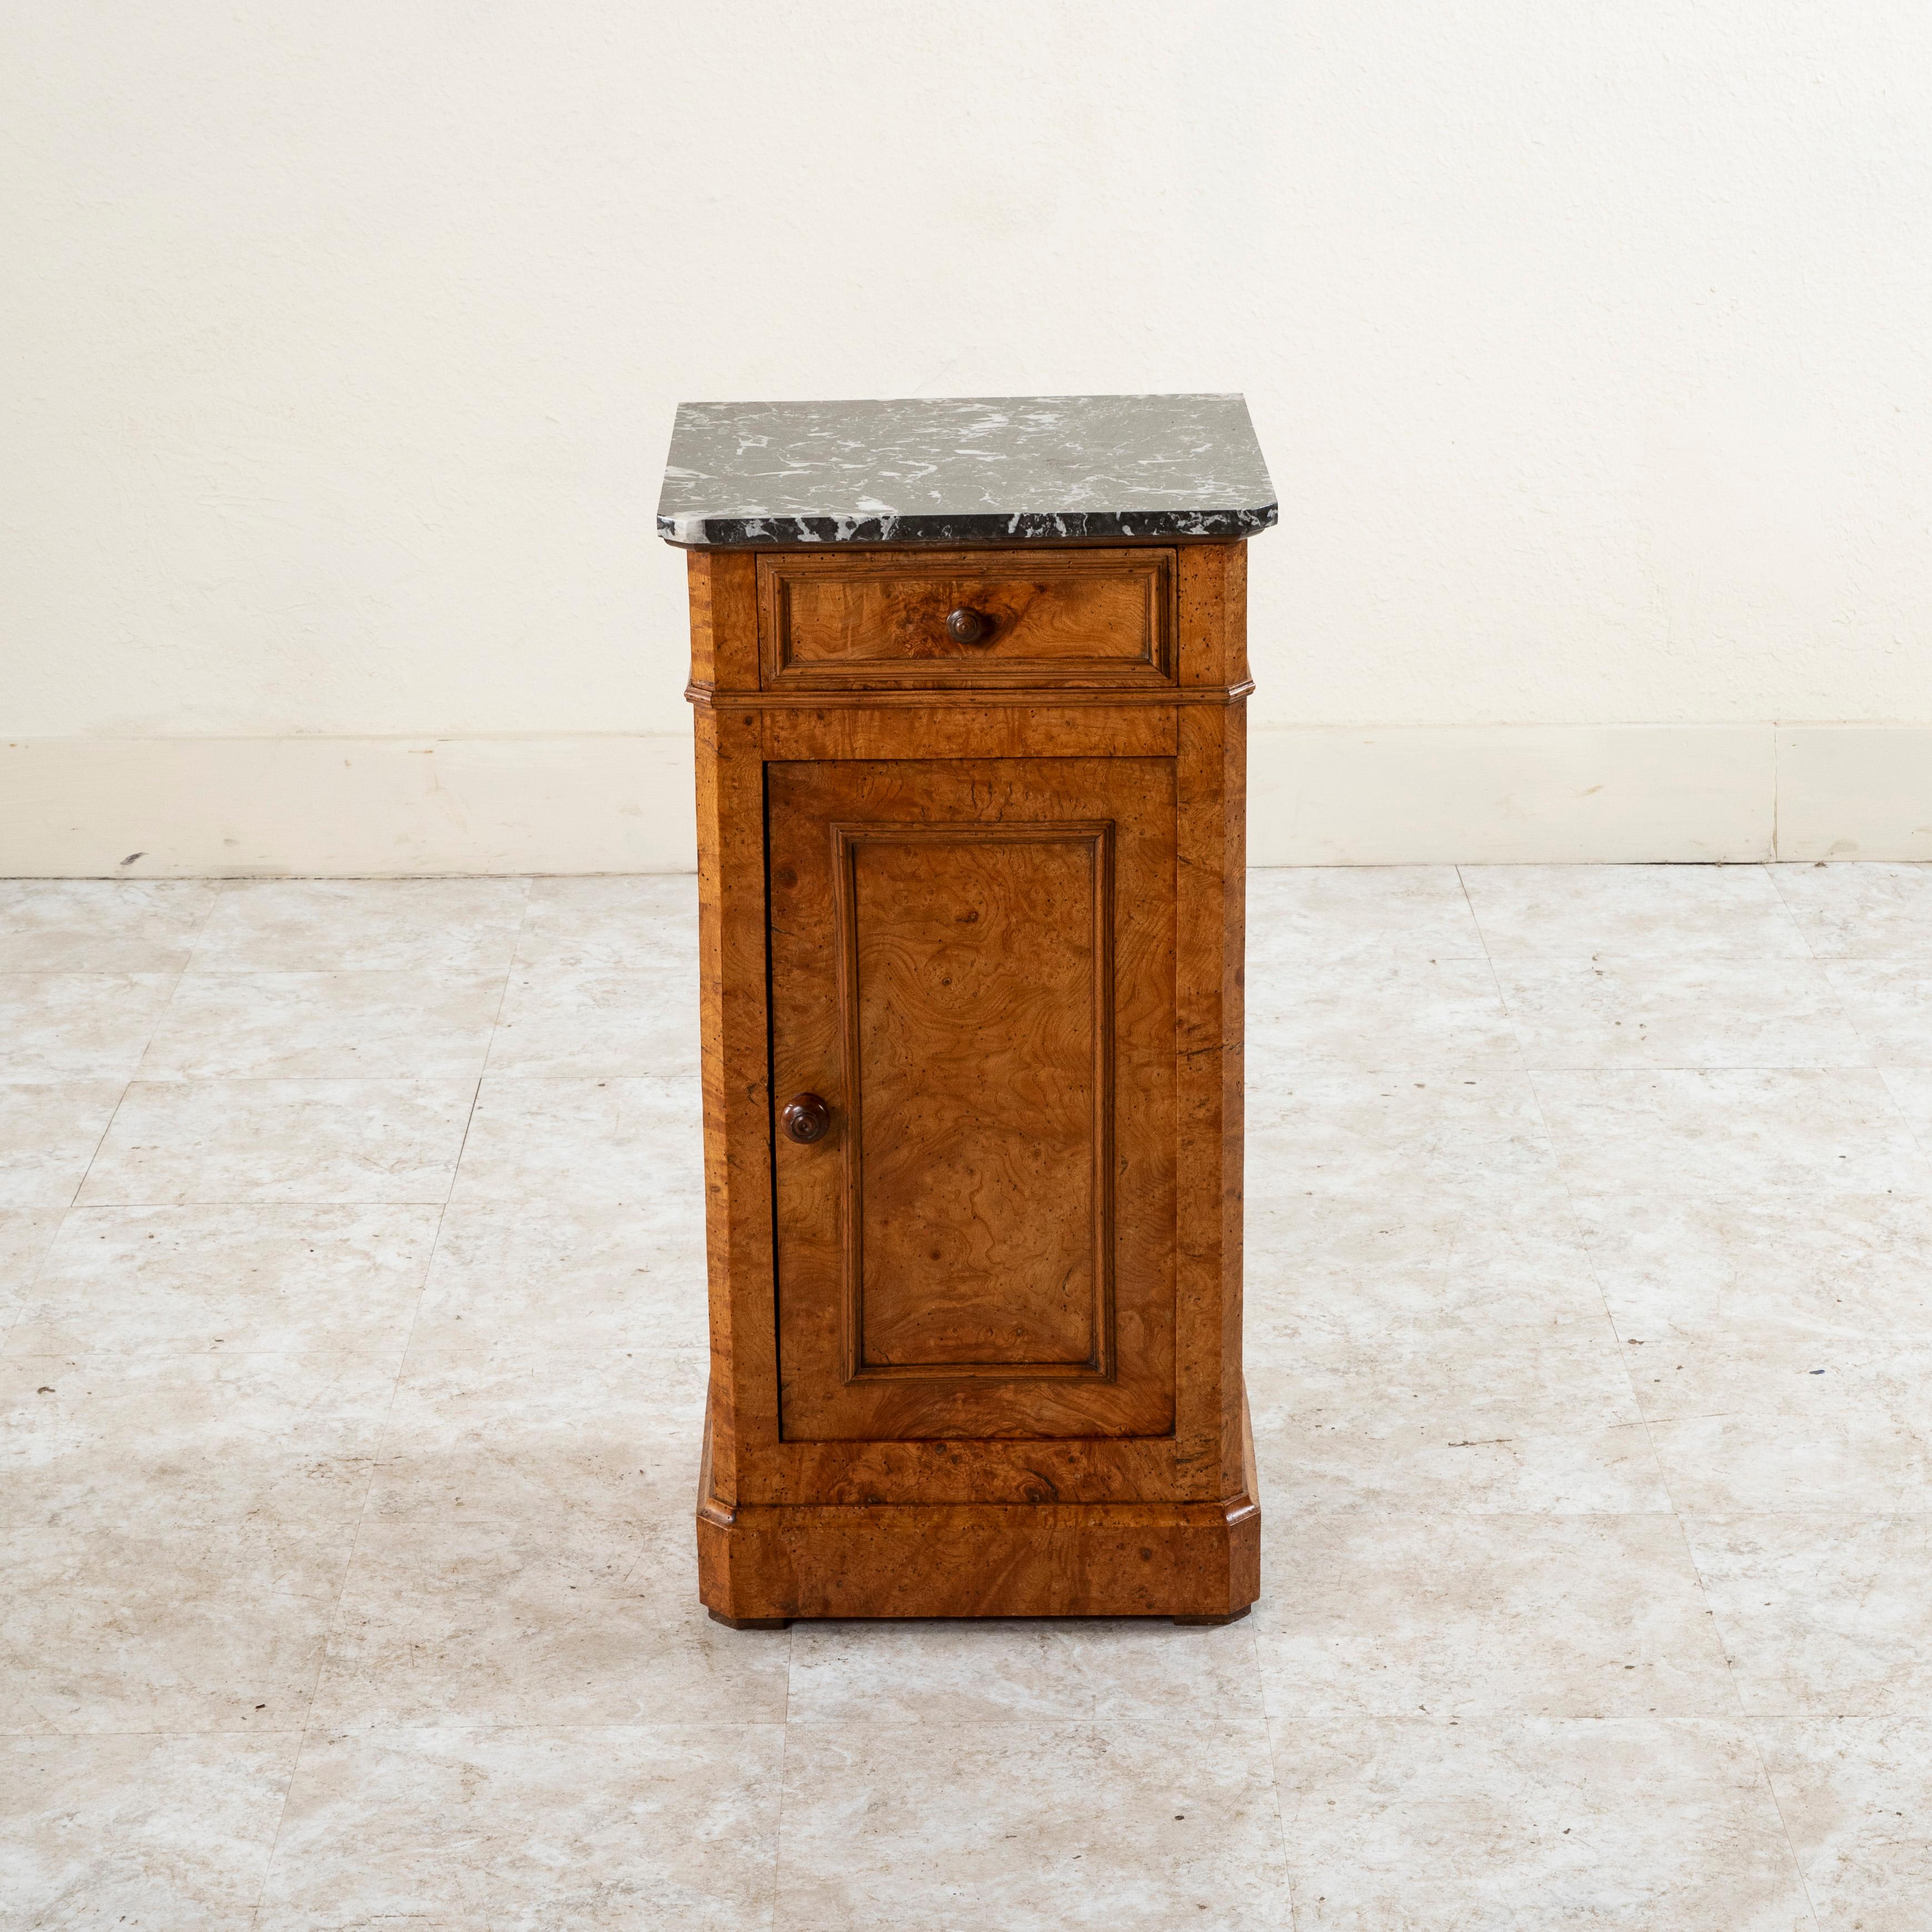 This early nineteenth century French Restauration period burl elm nightstand or side table features a Saint Anne marble top. It has a single drawer of dovetail construction, and the door below opens to allow access to a cabinet with a shelf for